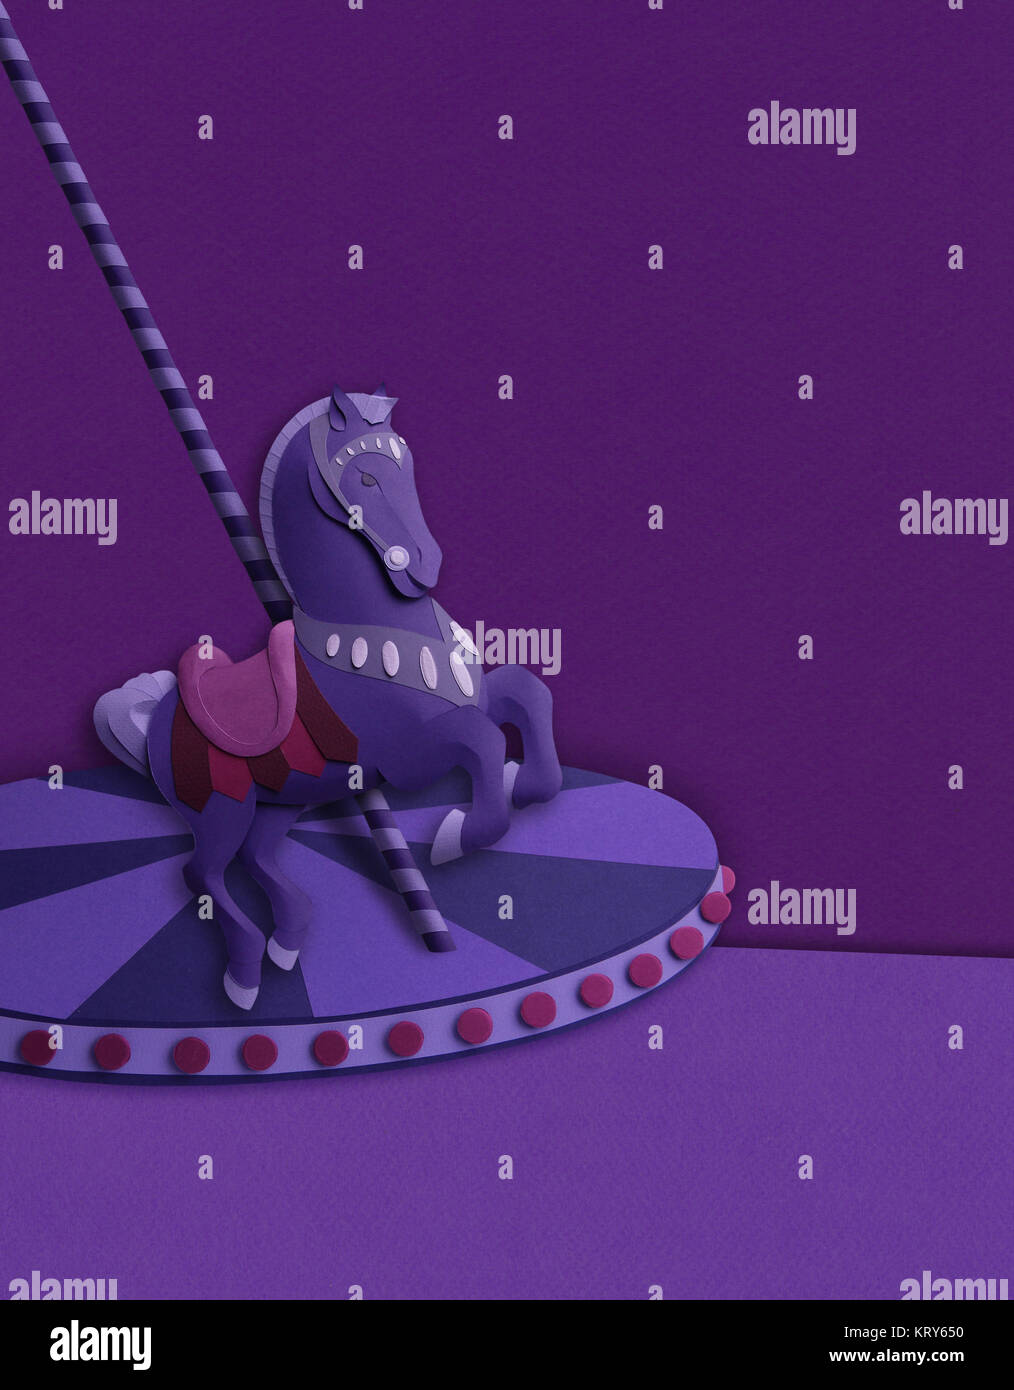 Paper sculpture illustration by Gail Armstrong . A fairground scene with carousel horse and rollercoaster in purple Stock Photo